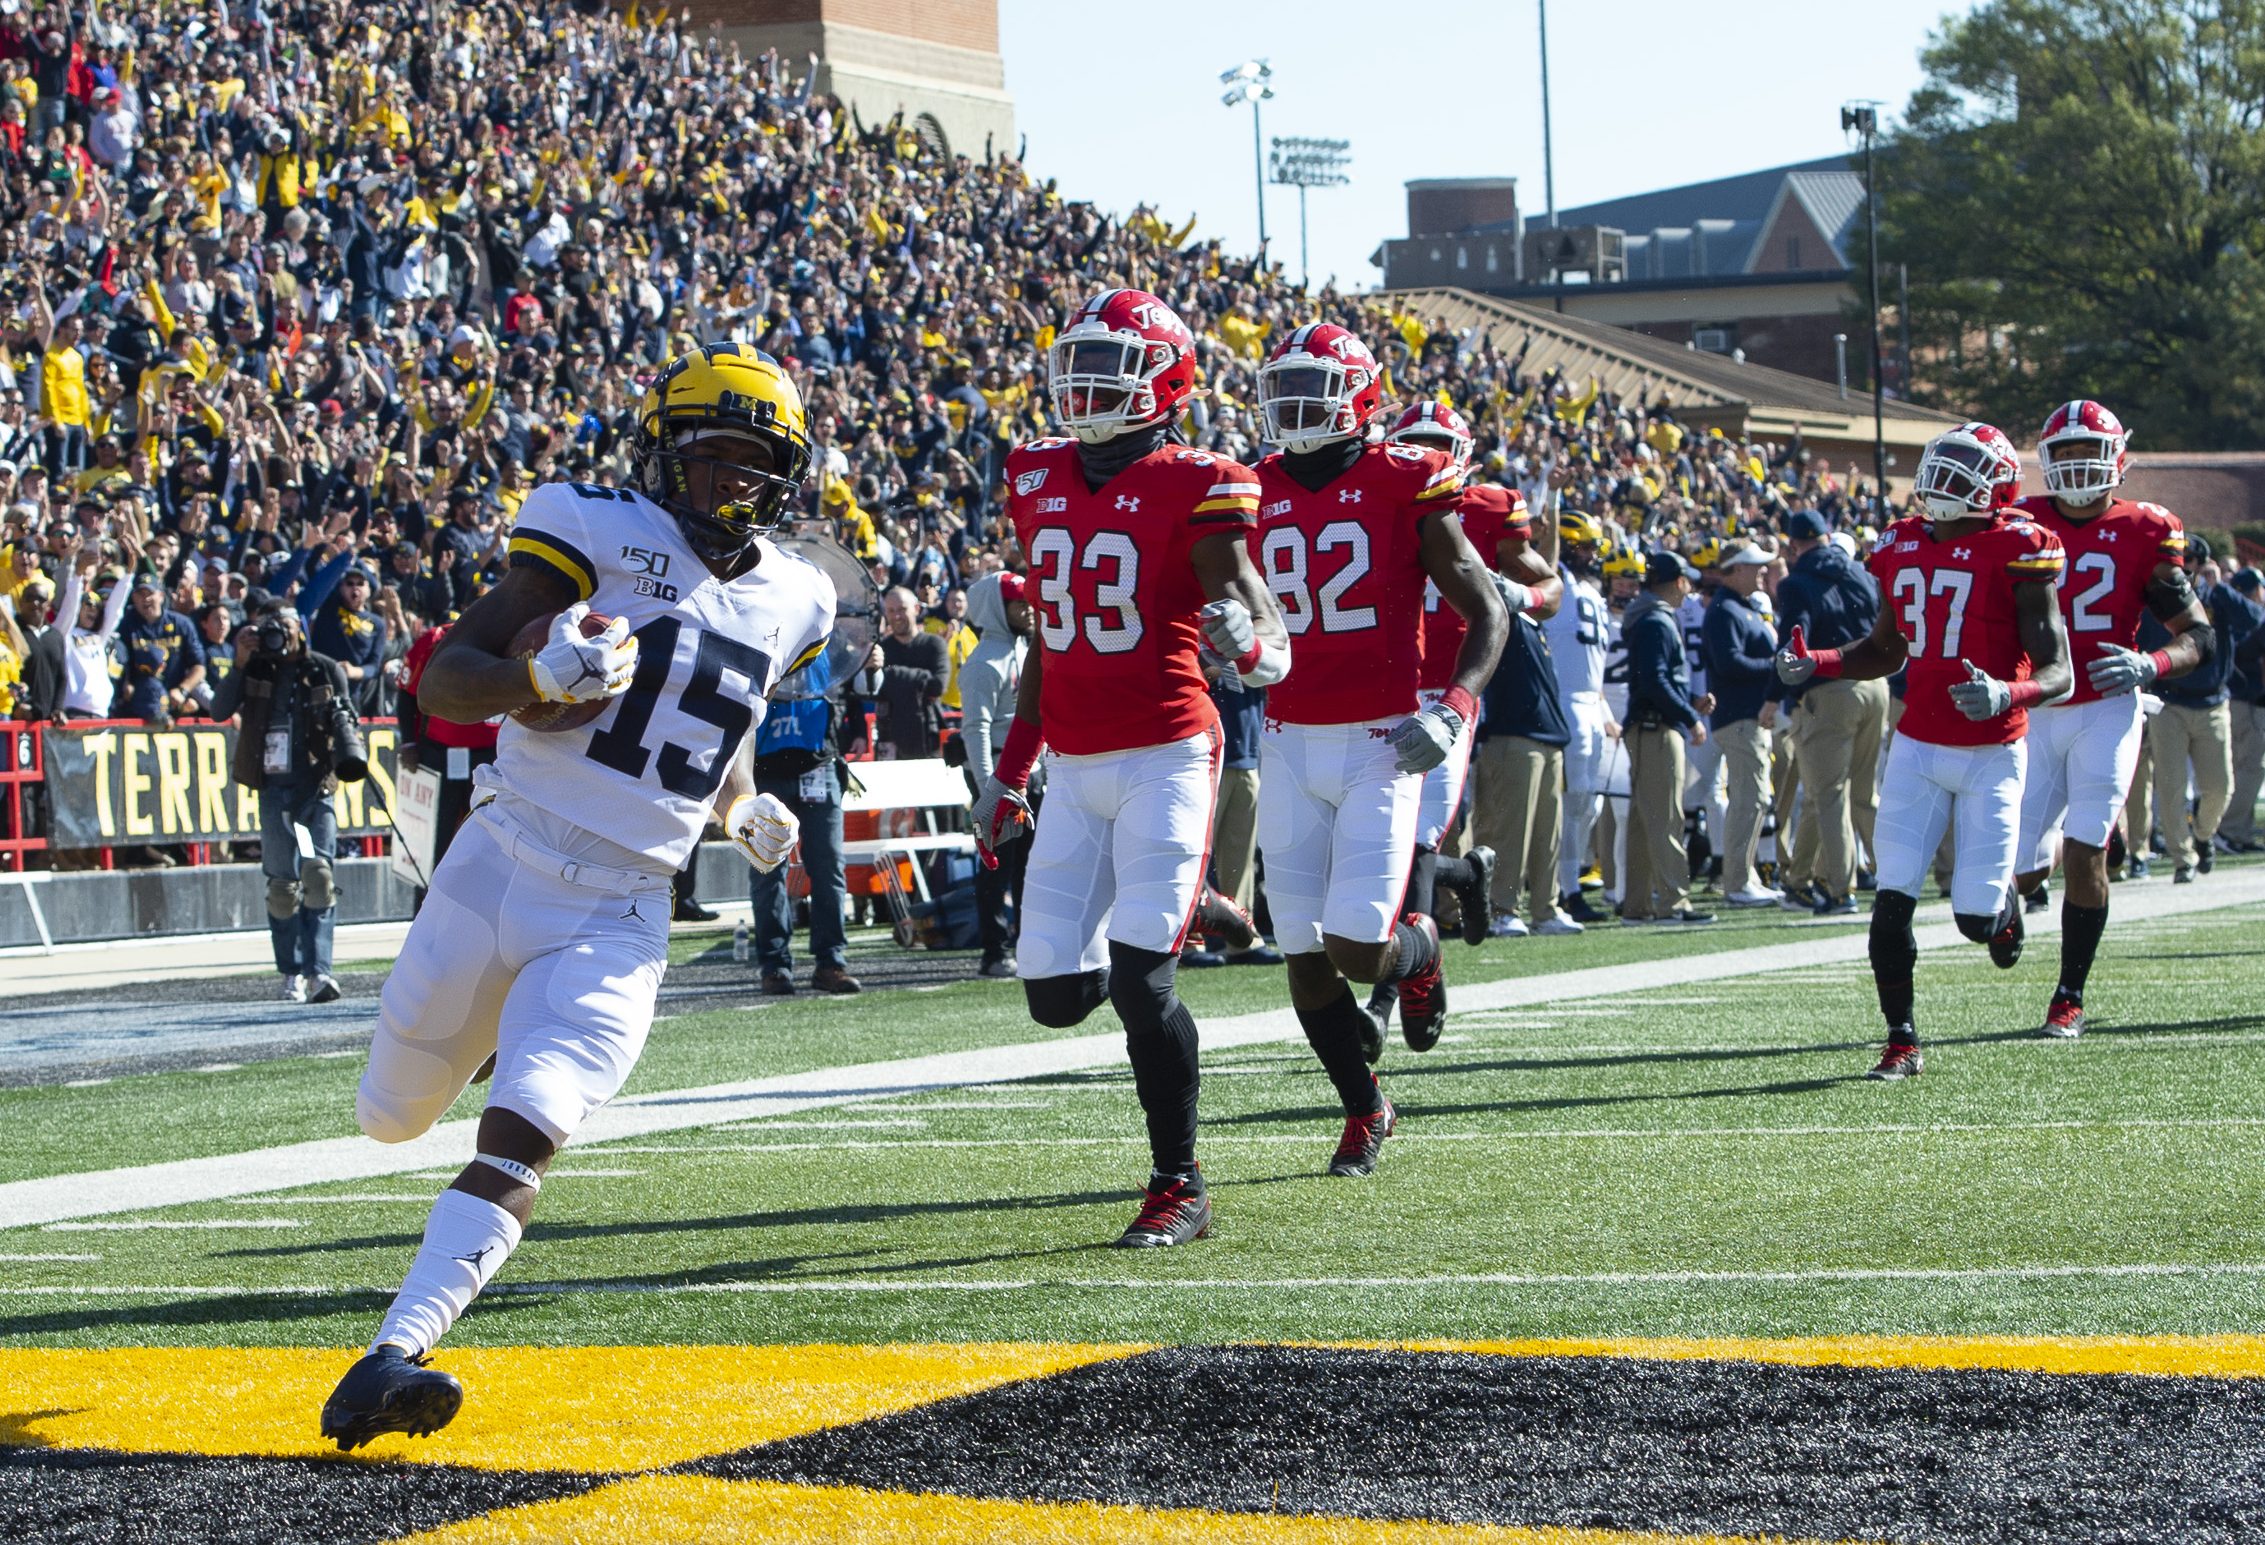 Podcast: Why a win for Michigan is a win for Penn State